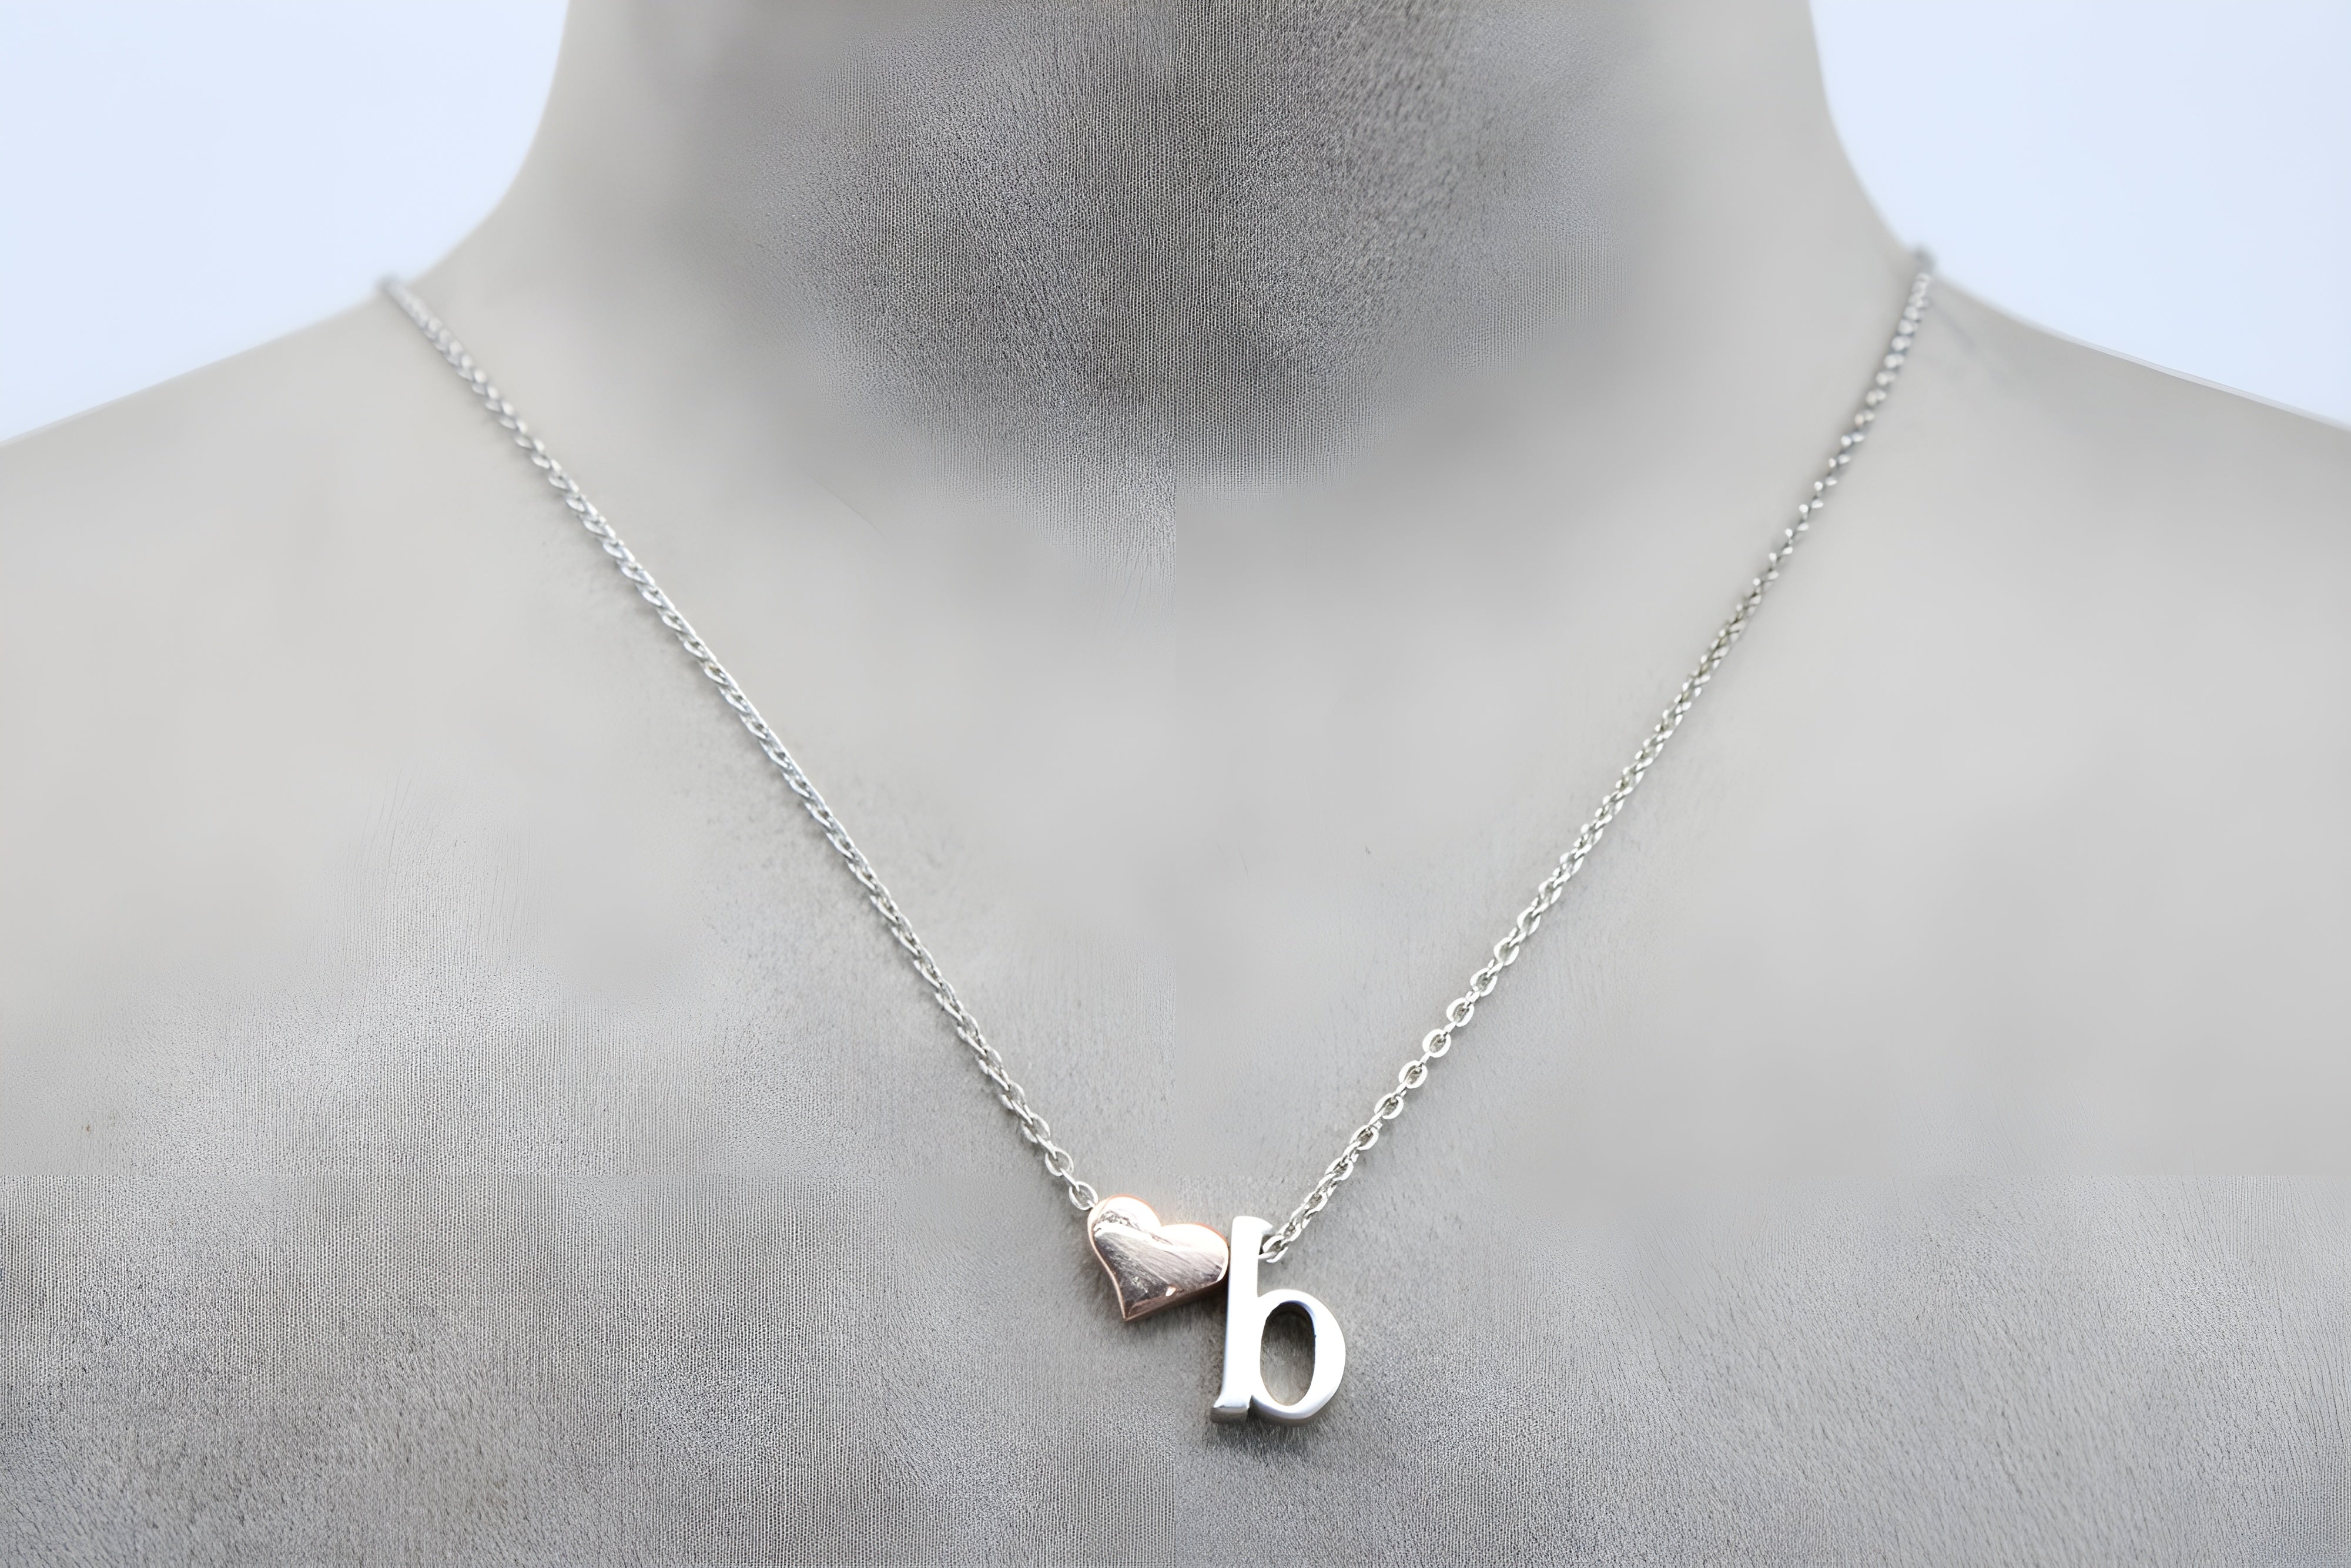 Beloved Initial Sterling Silver Heart Pendant with Swarovski Crystals